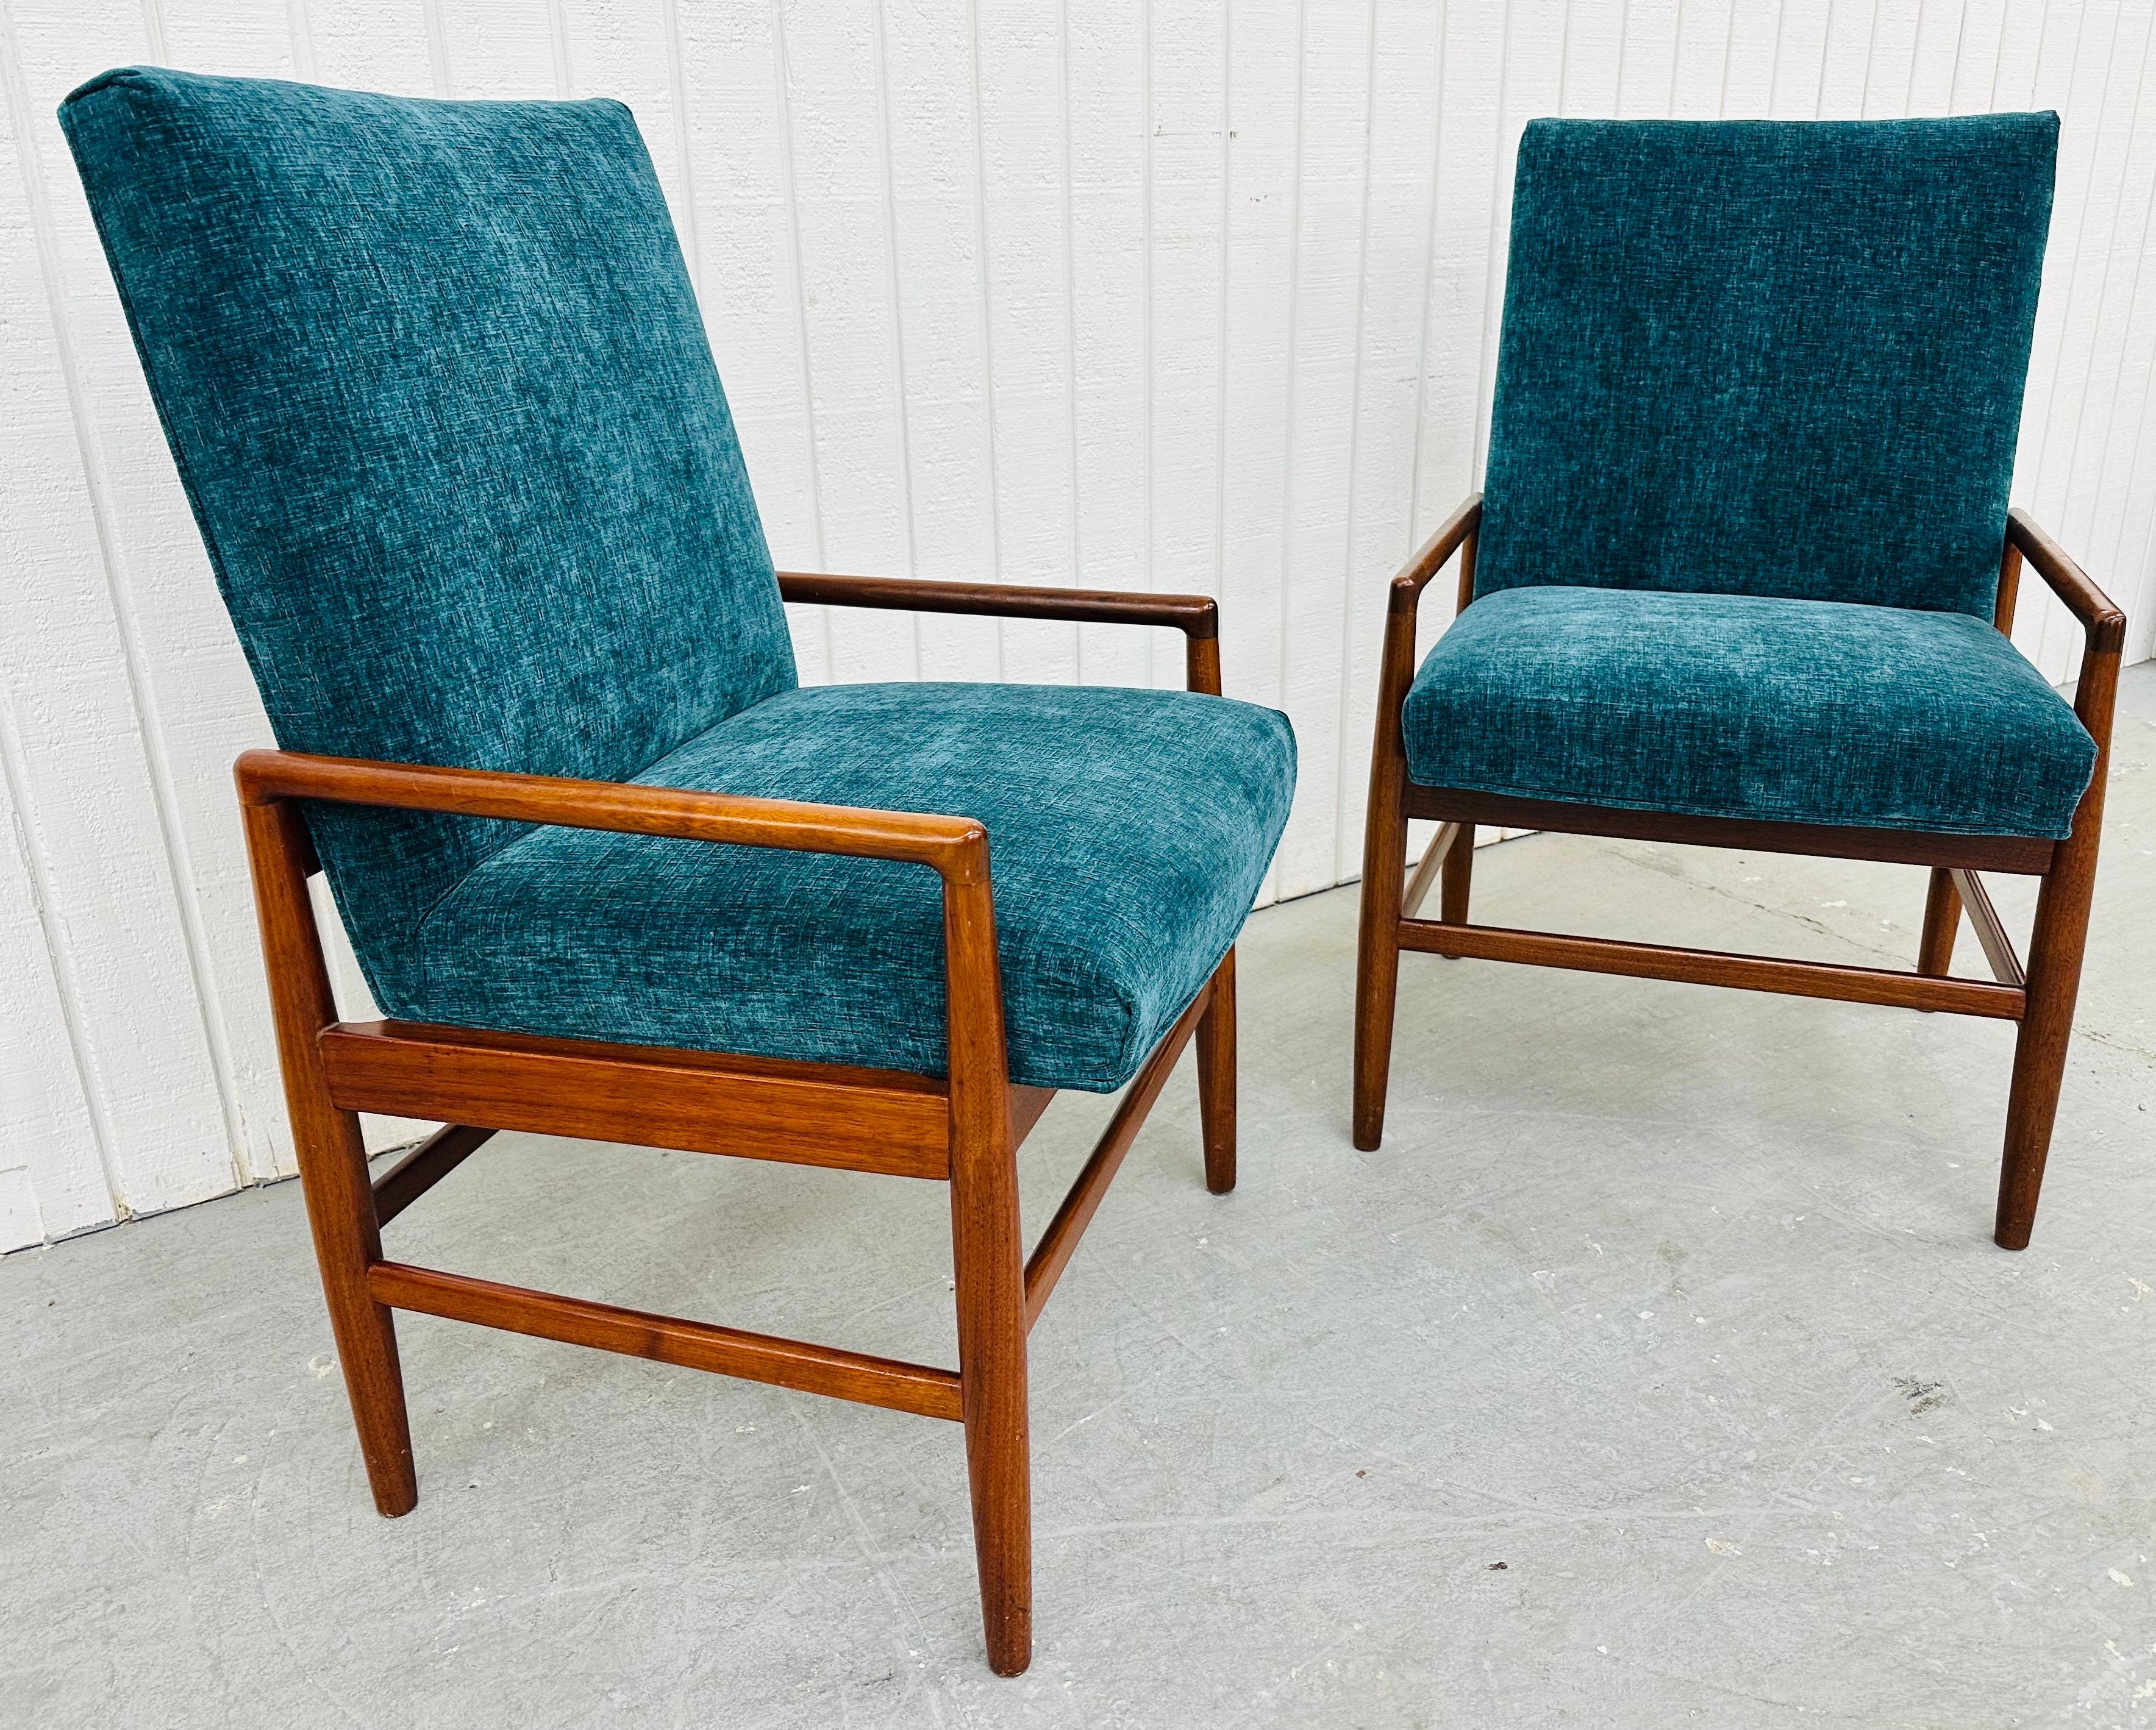 This listing is for a pair of Mid-Century Danish Modern Walnut Lounge Chairs. Featuring a straight line design, newly upholstered body, wooden frames, and a beautiful walnut finish. This is an exceptional combination of quality and Danish design!